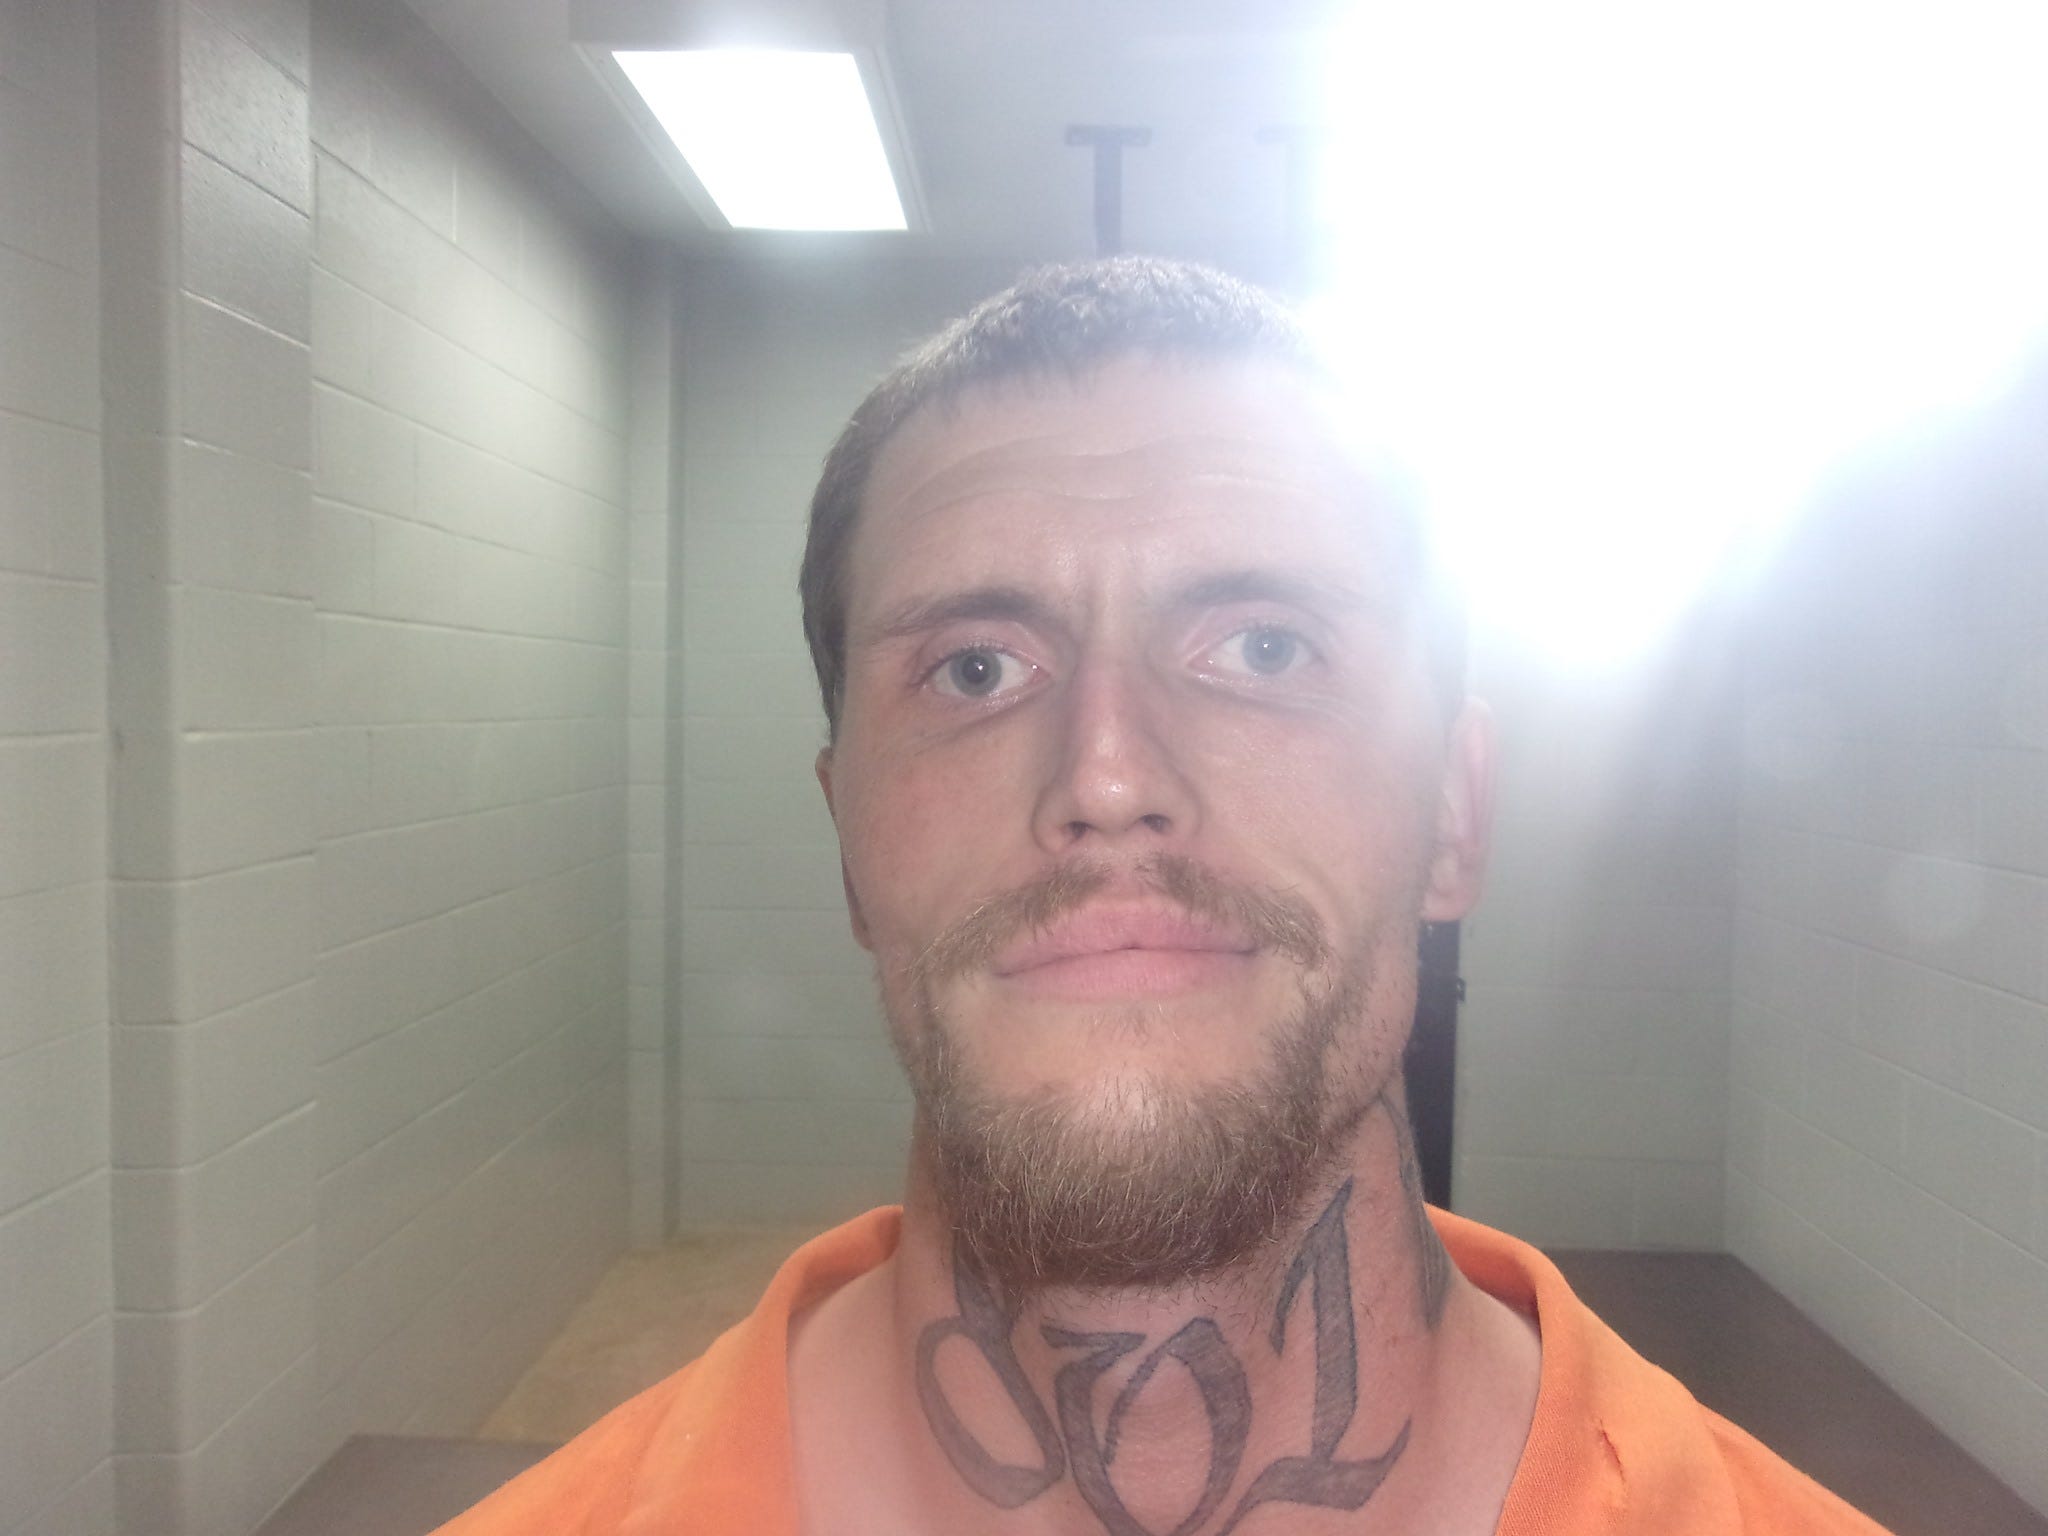 Darin Joshua Terry, 27, was arrested by the VPSO on April 30.